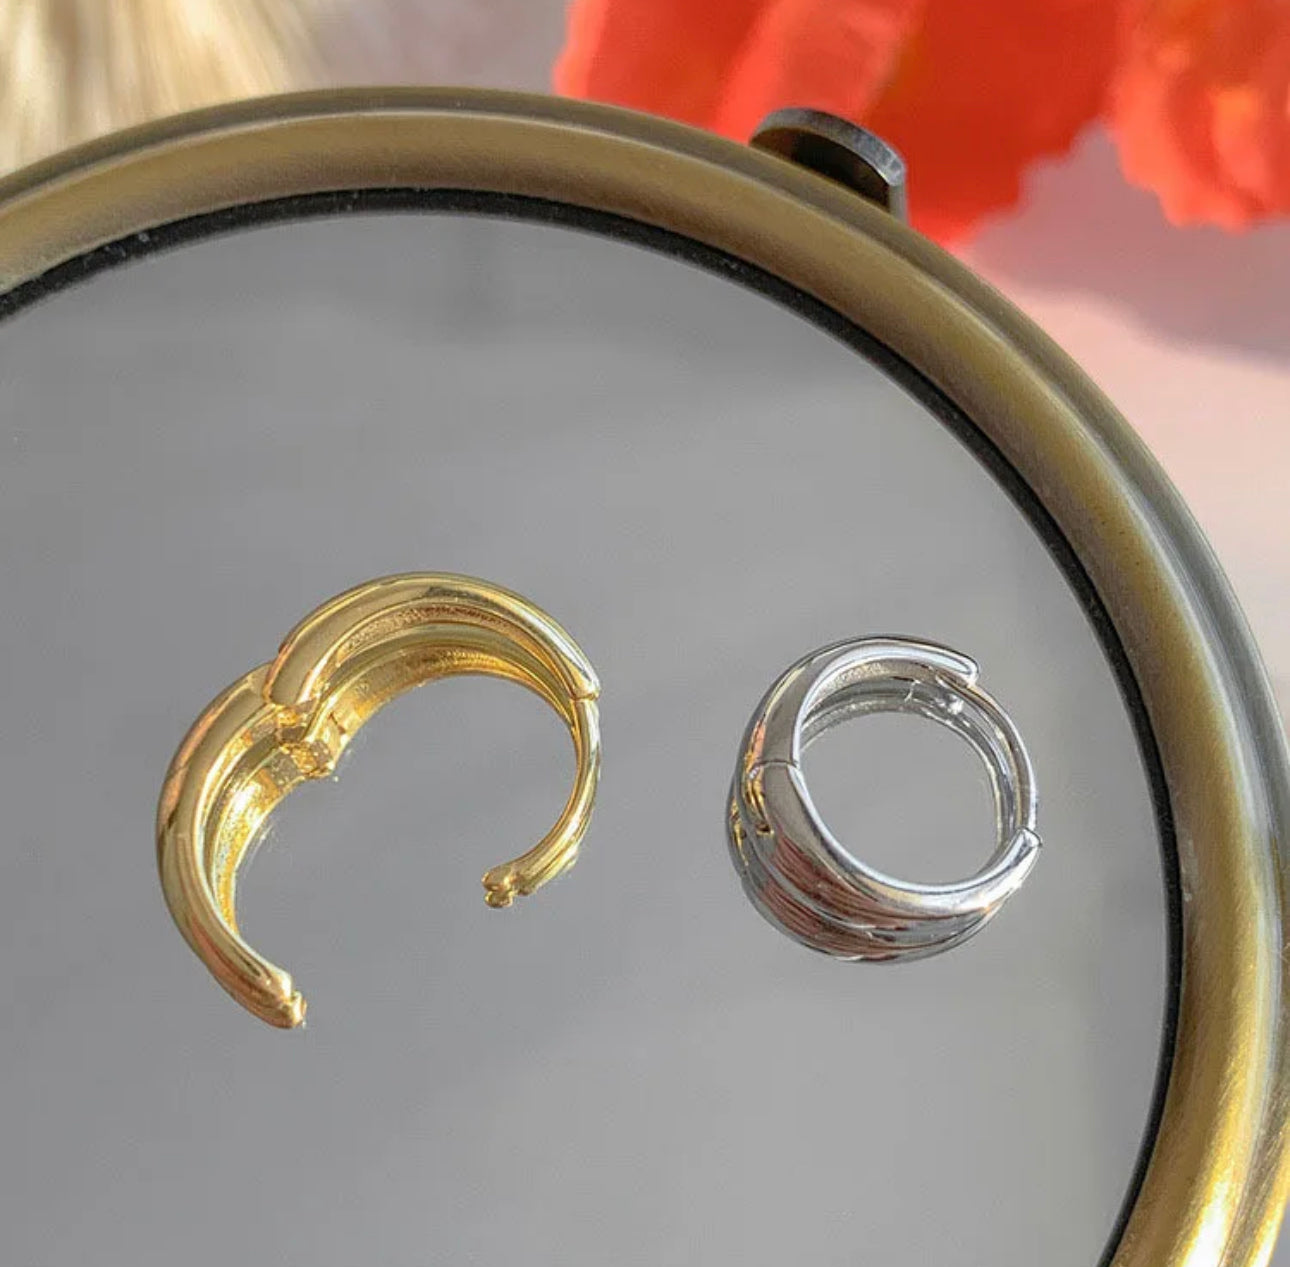 a close up of two rings on a table